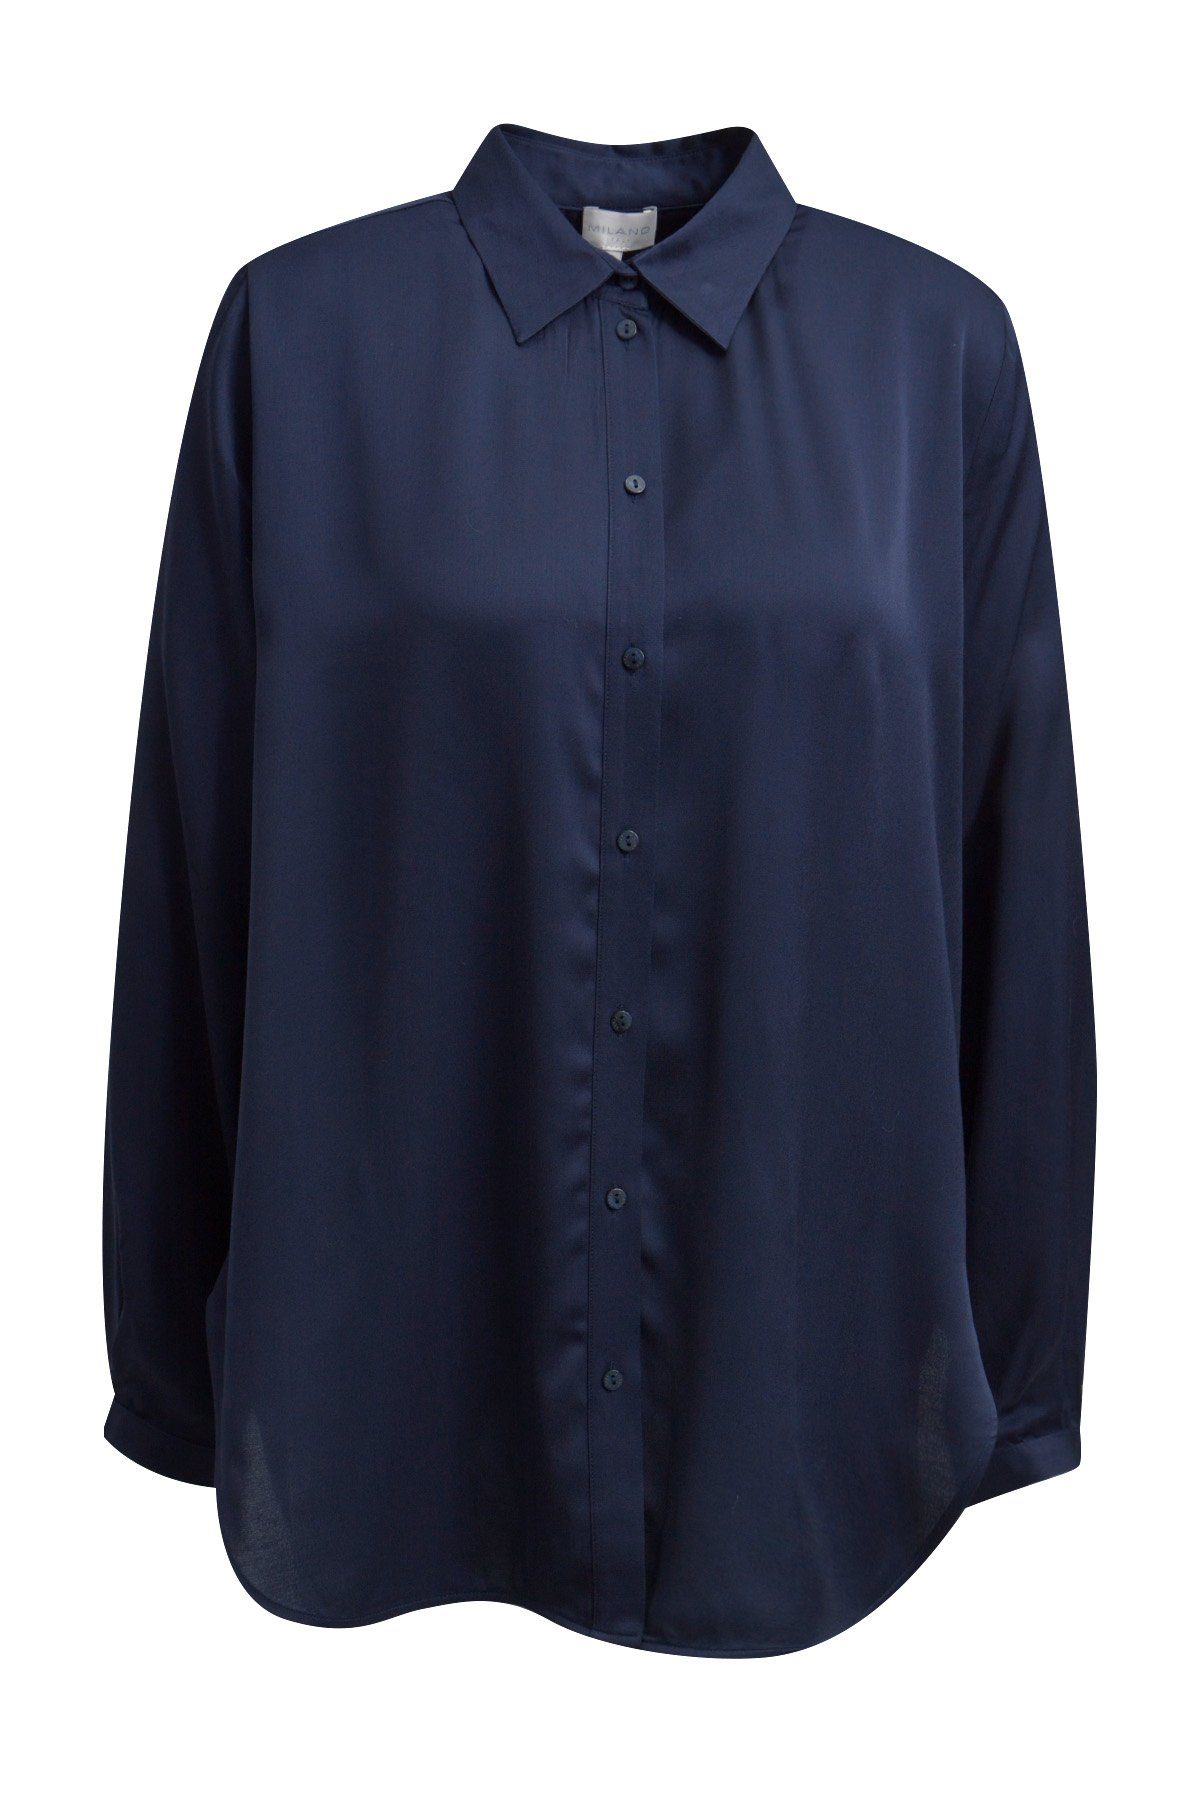 PLACKET WITH Italy Bluse Klassische BLOUSE COLLAR, Milano 1/1 AND